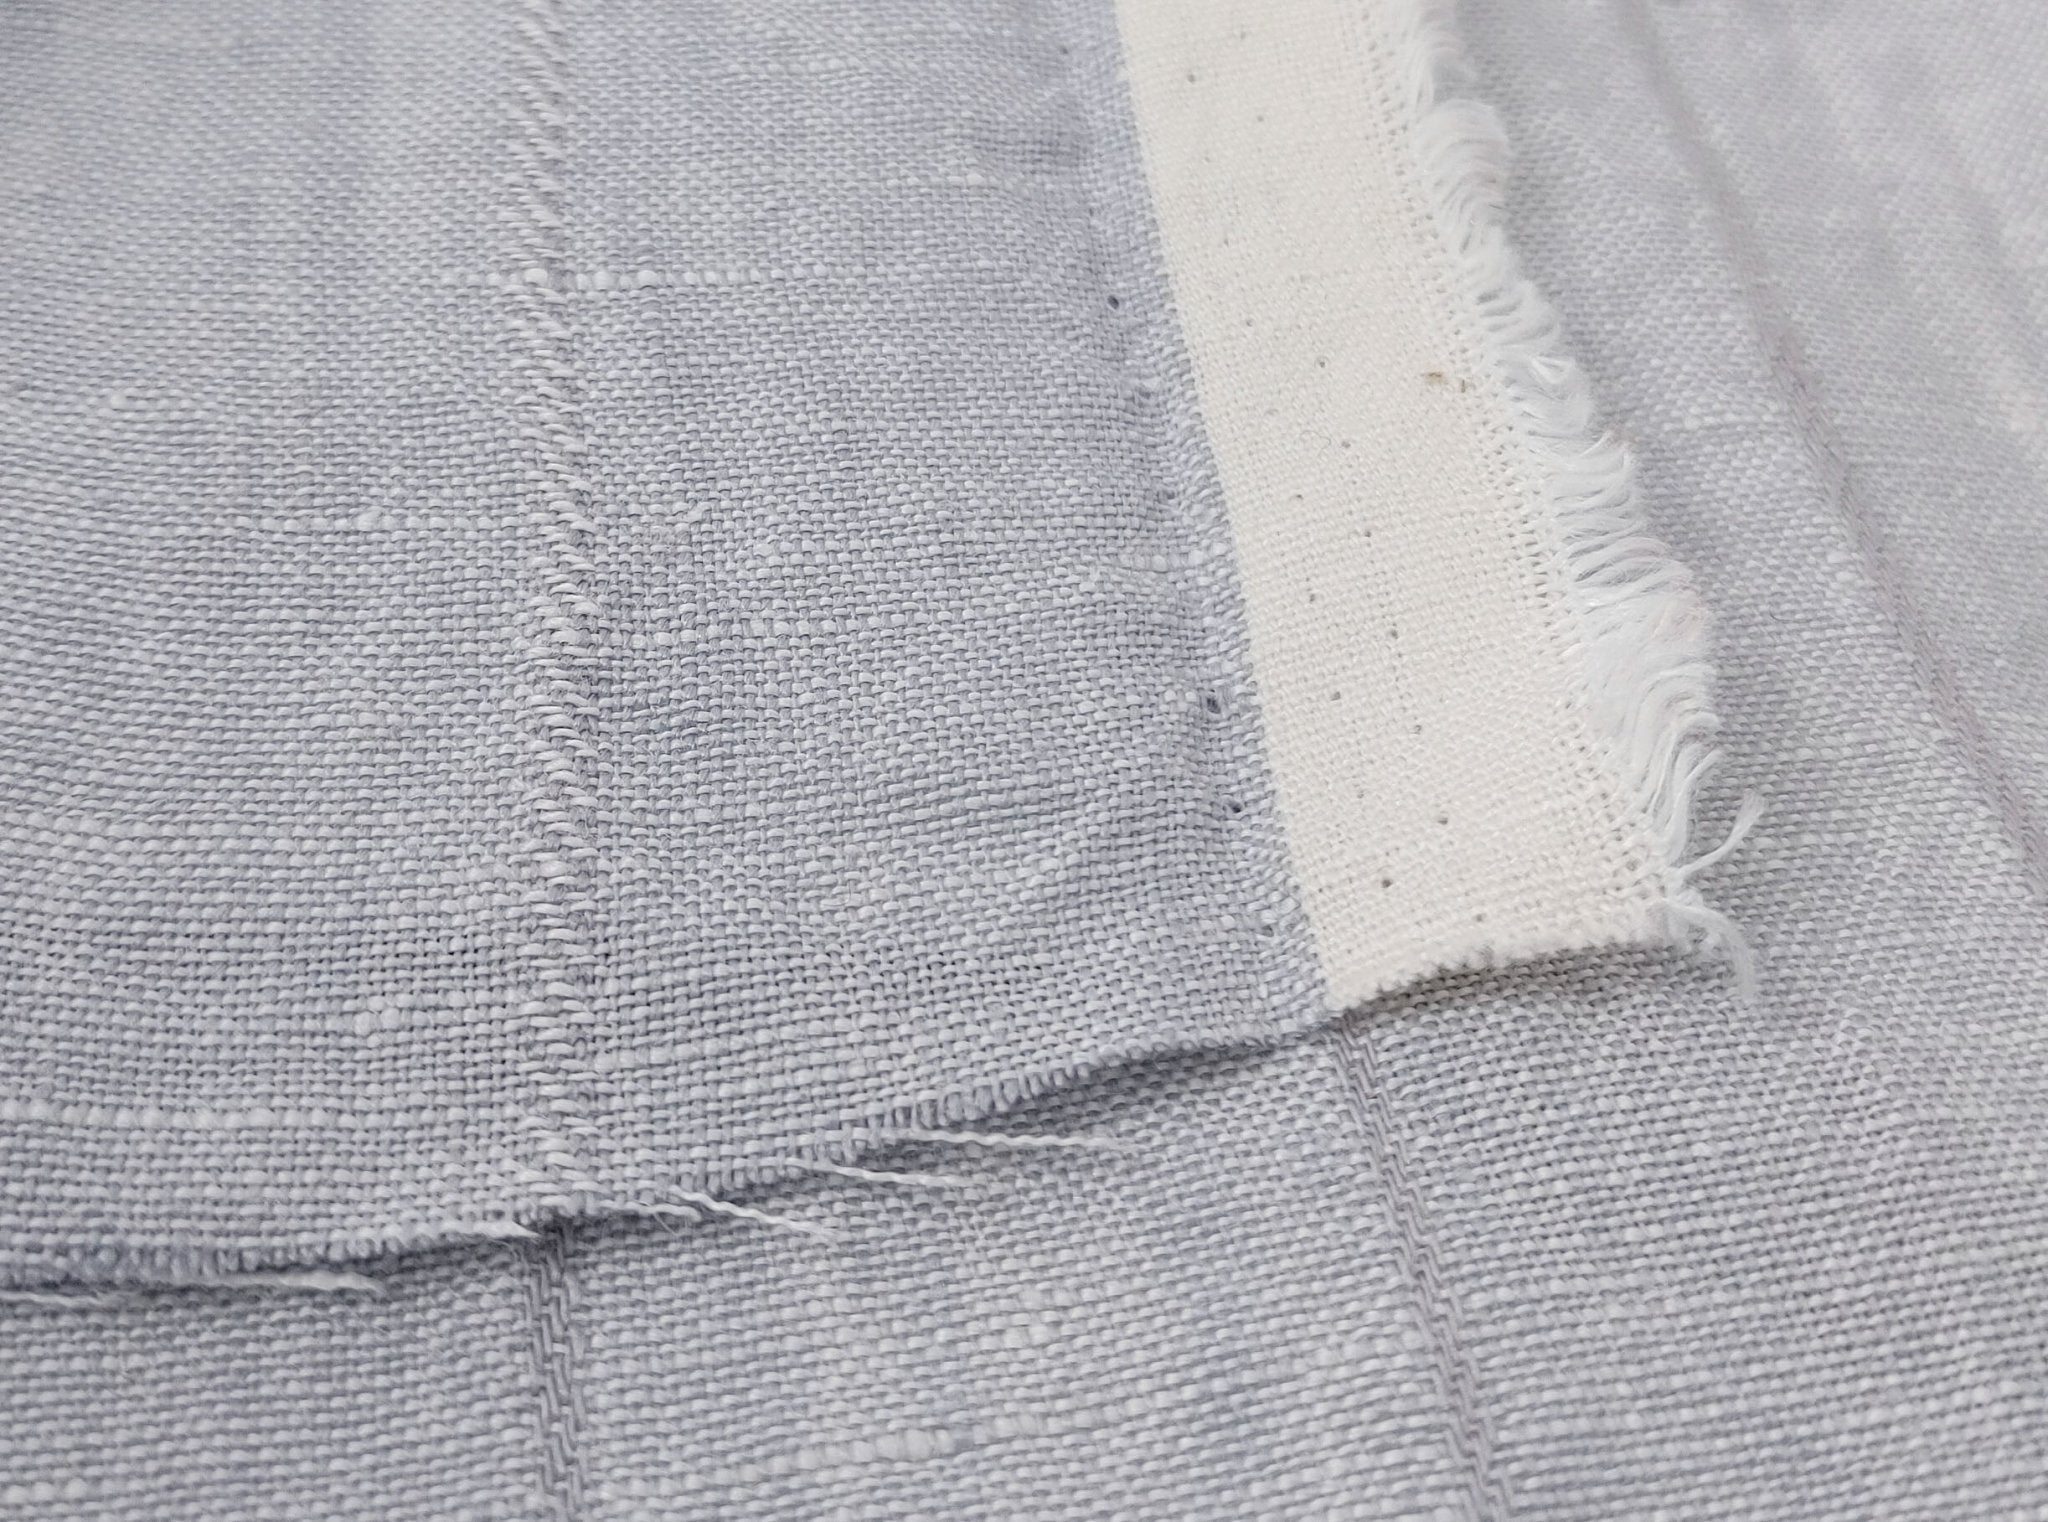 100% Linen Fabric Grey Color Dobby Stripe 6900 - The Linen Lab - Grey